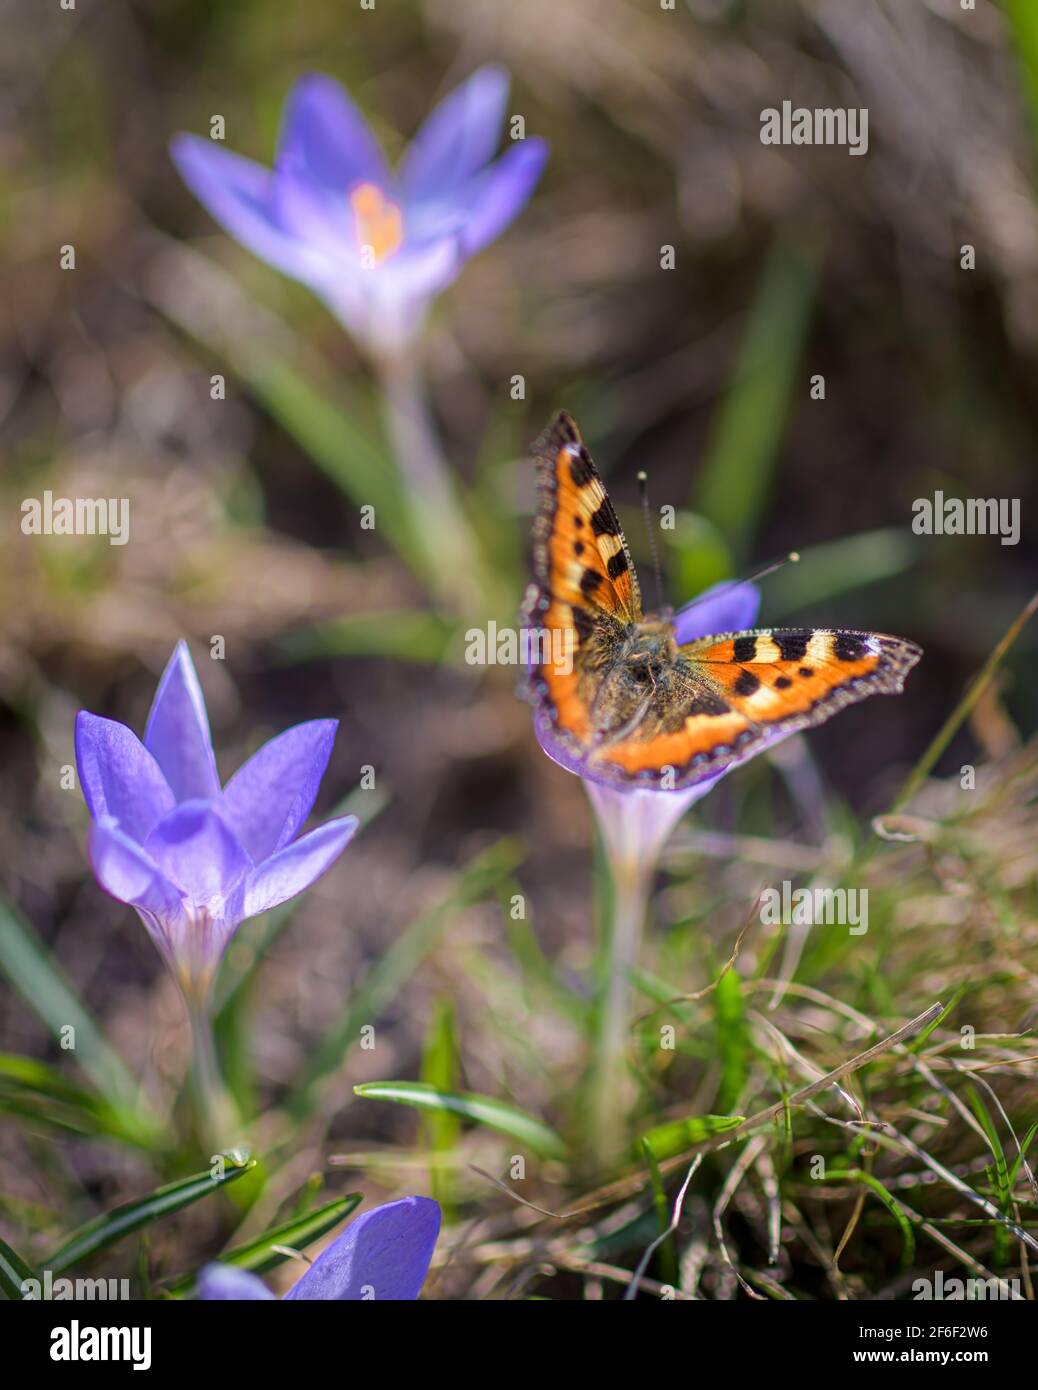 Orange butterfly on a flower of purple crocus in spring sunny day close up. Stock Photo